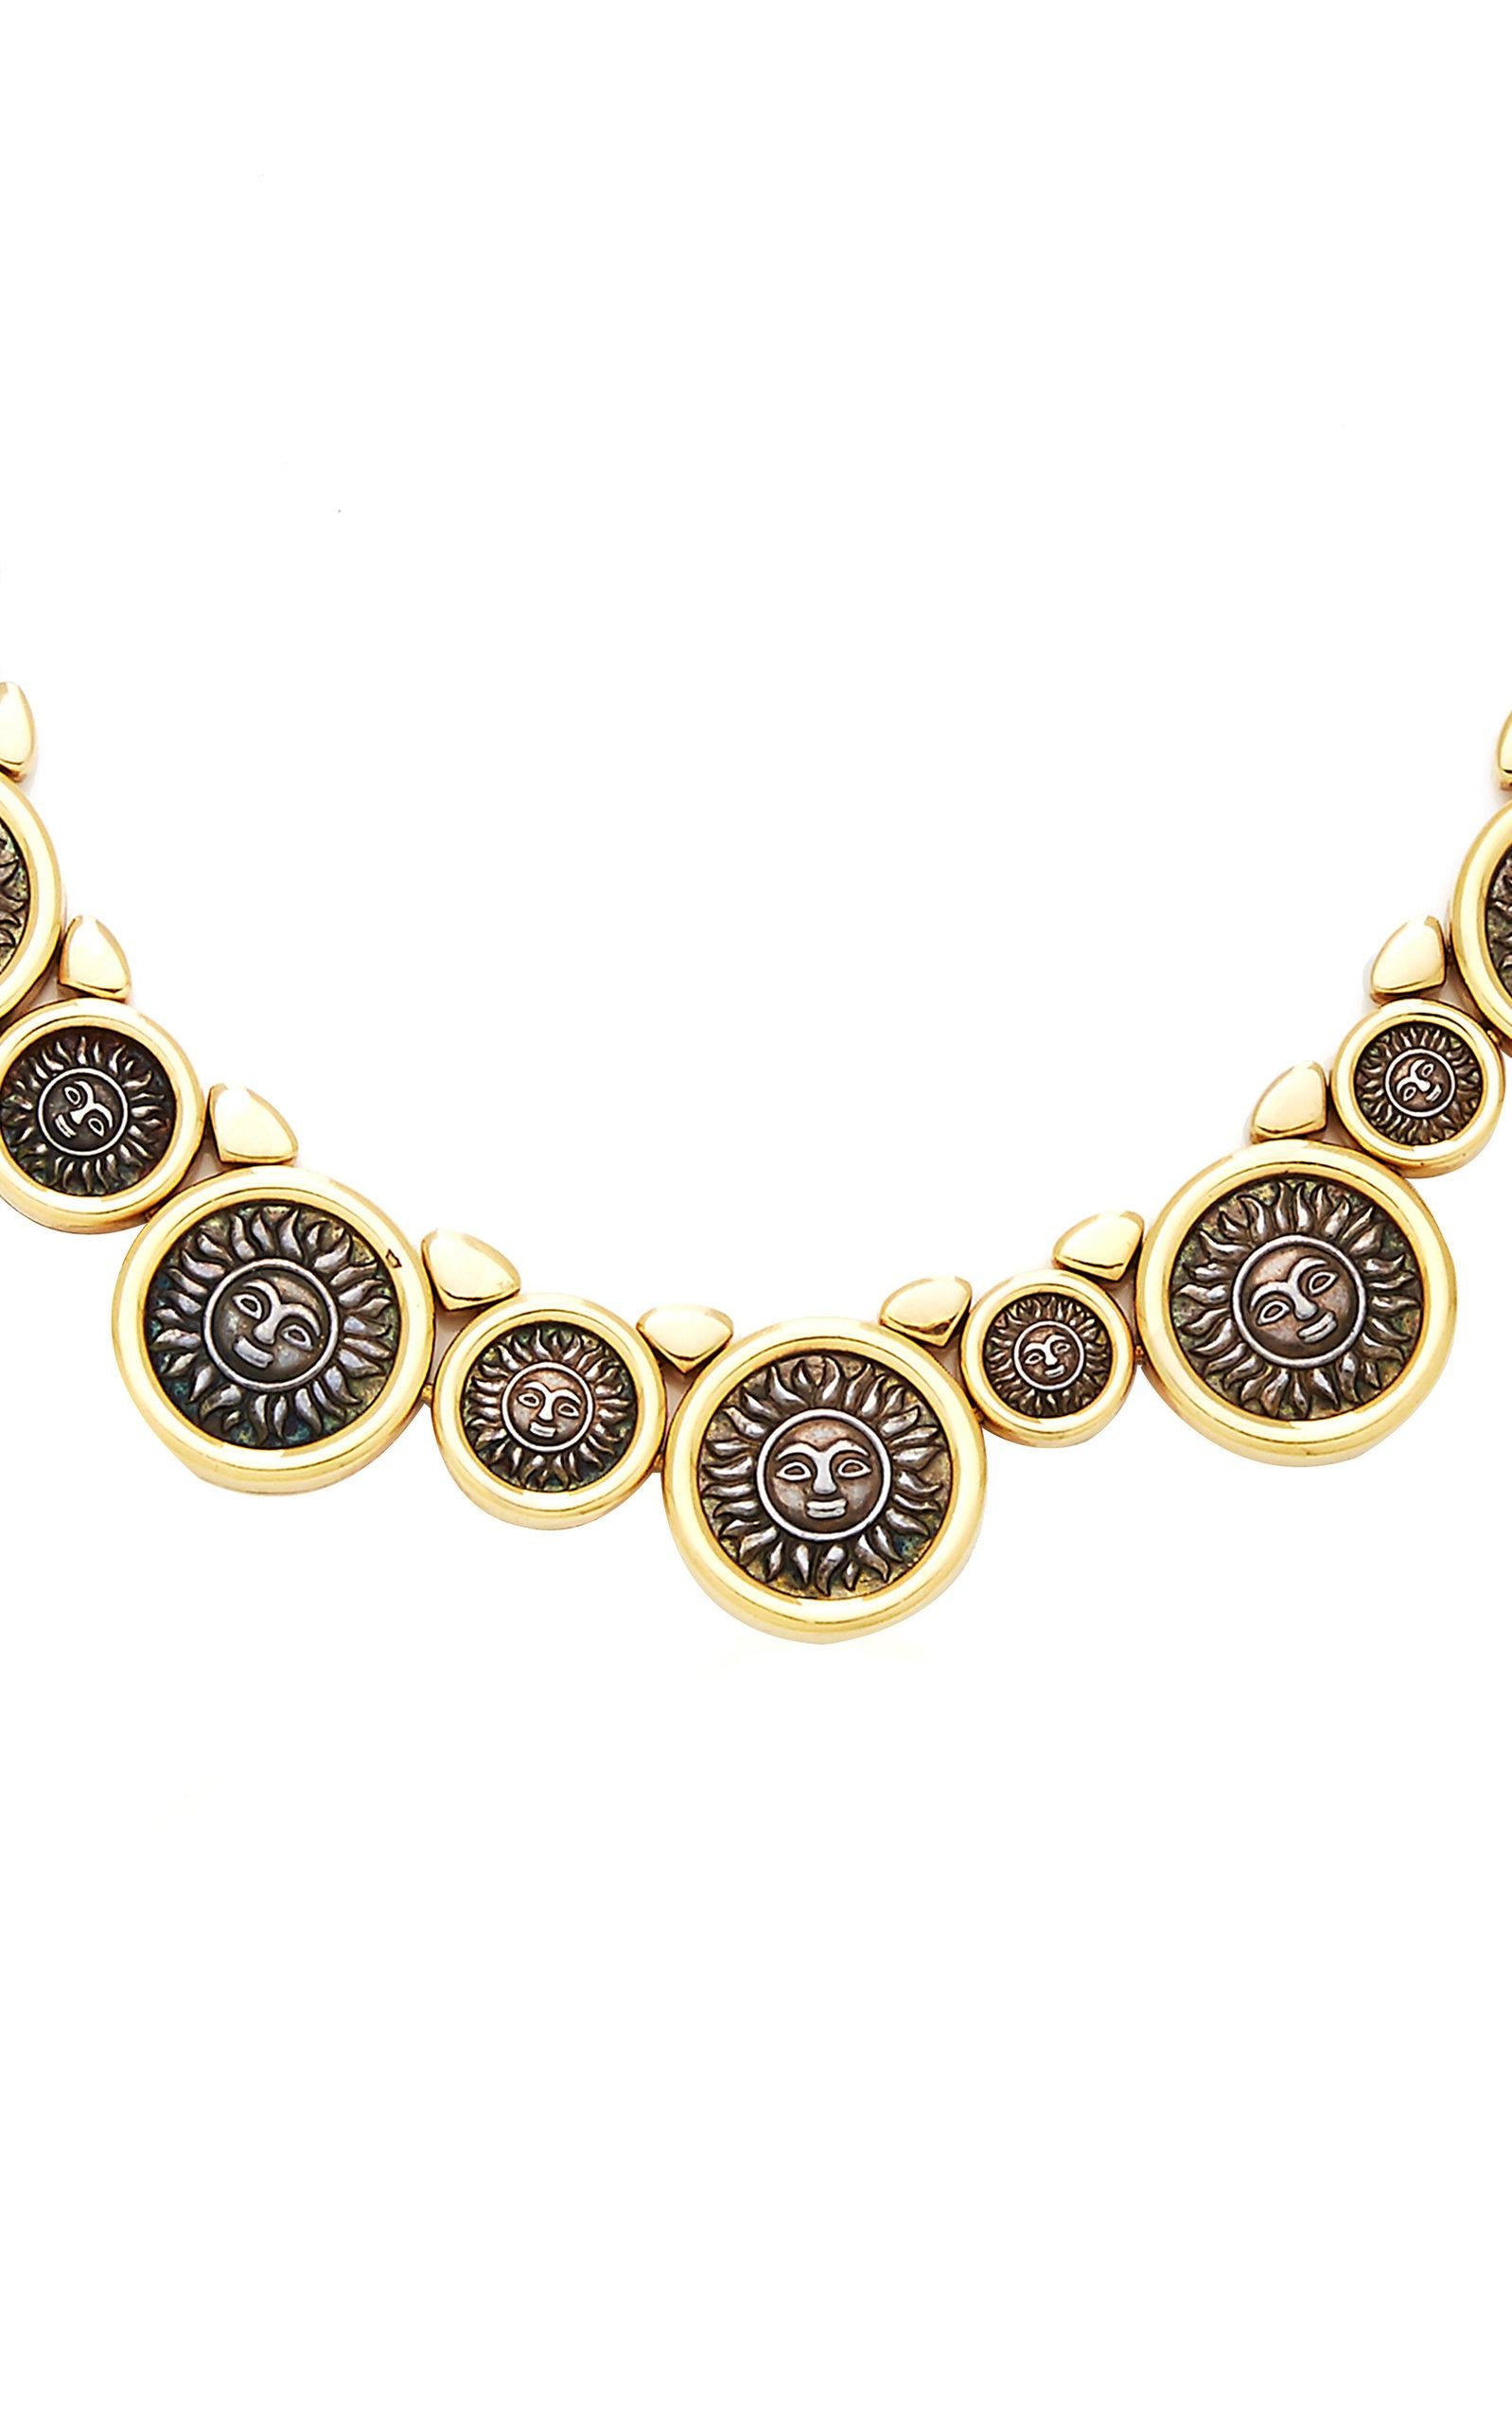 An unusual Marina B Necklace in 18kt yellow gold with silver solar coins. Made in Italy, circa 1980s.